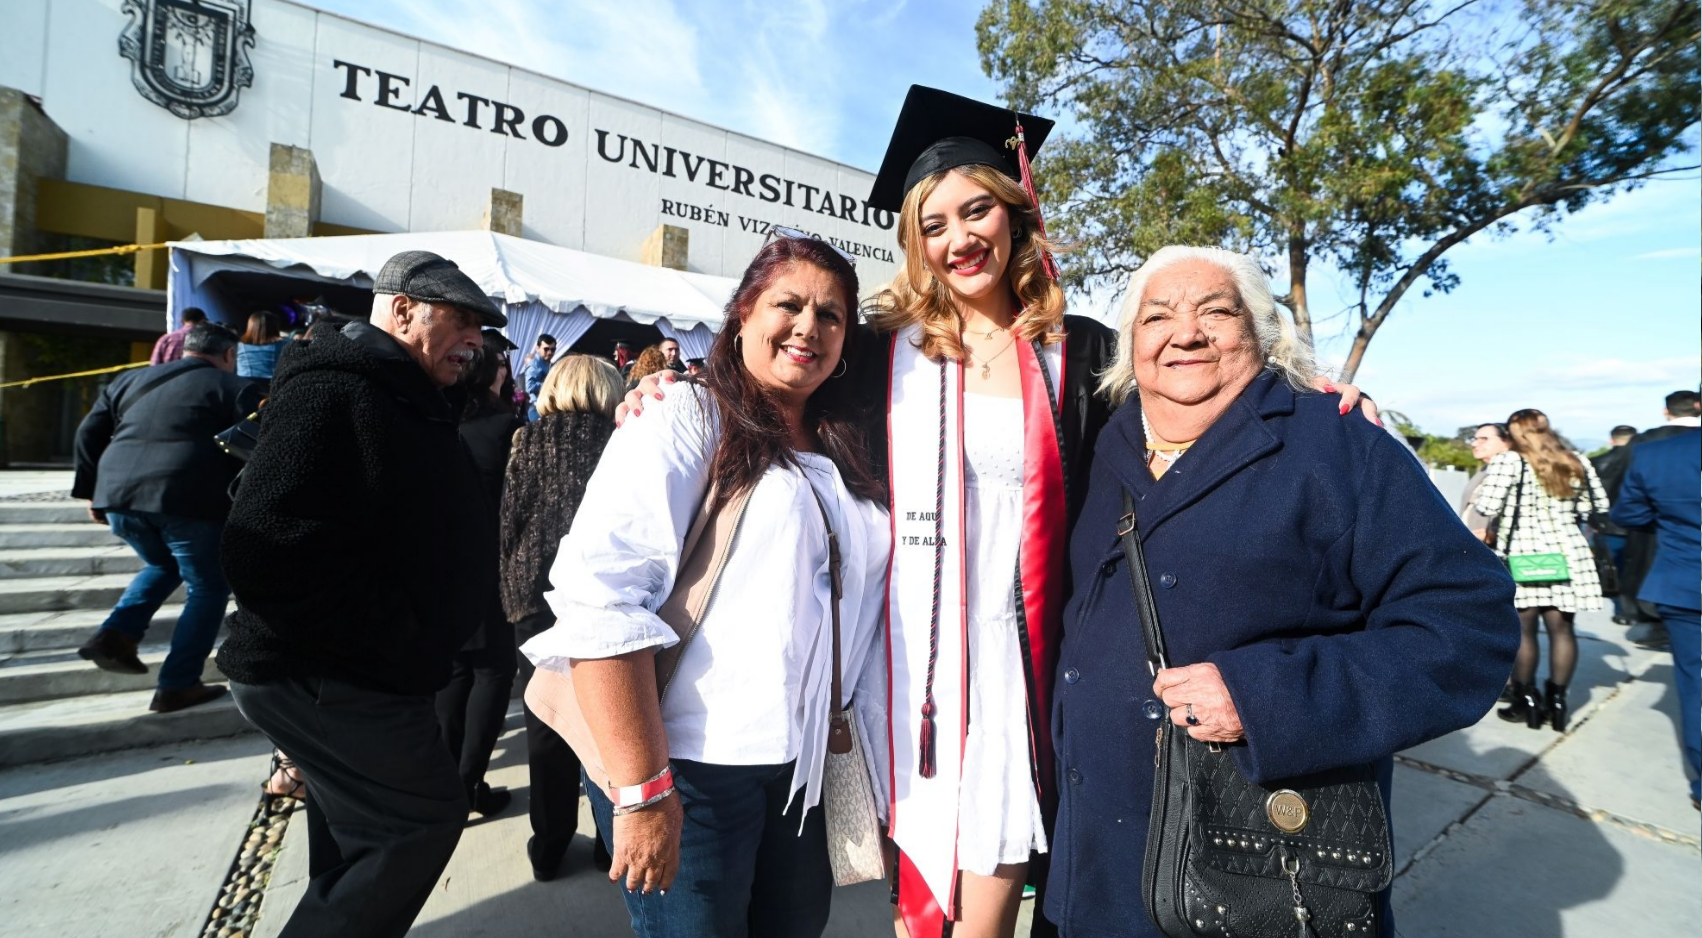 After the inaugural transborder graduation for SDSU Imperial Valley students in Mexicali, Mexico in 2022, the university expanded the initiative to Tijuana for San Diego-based students. (SDSU)